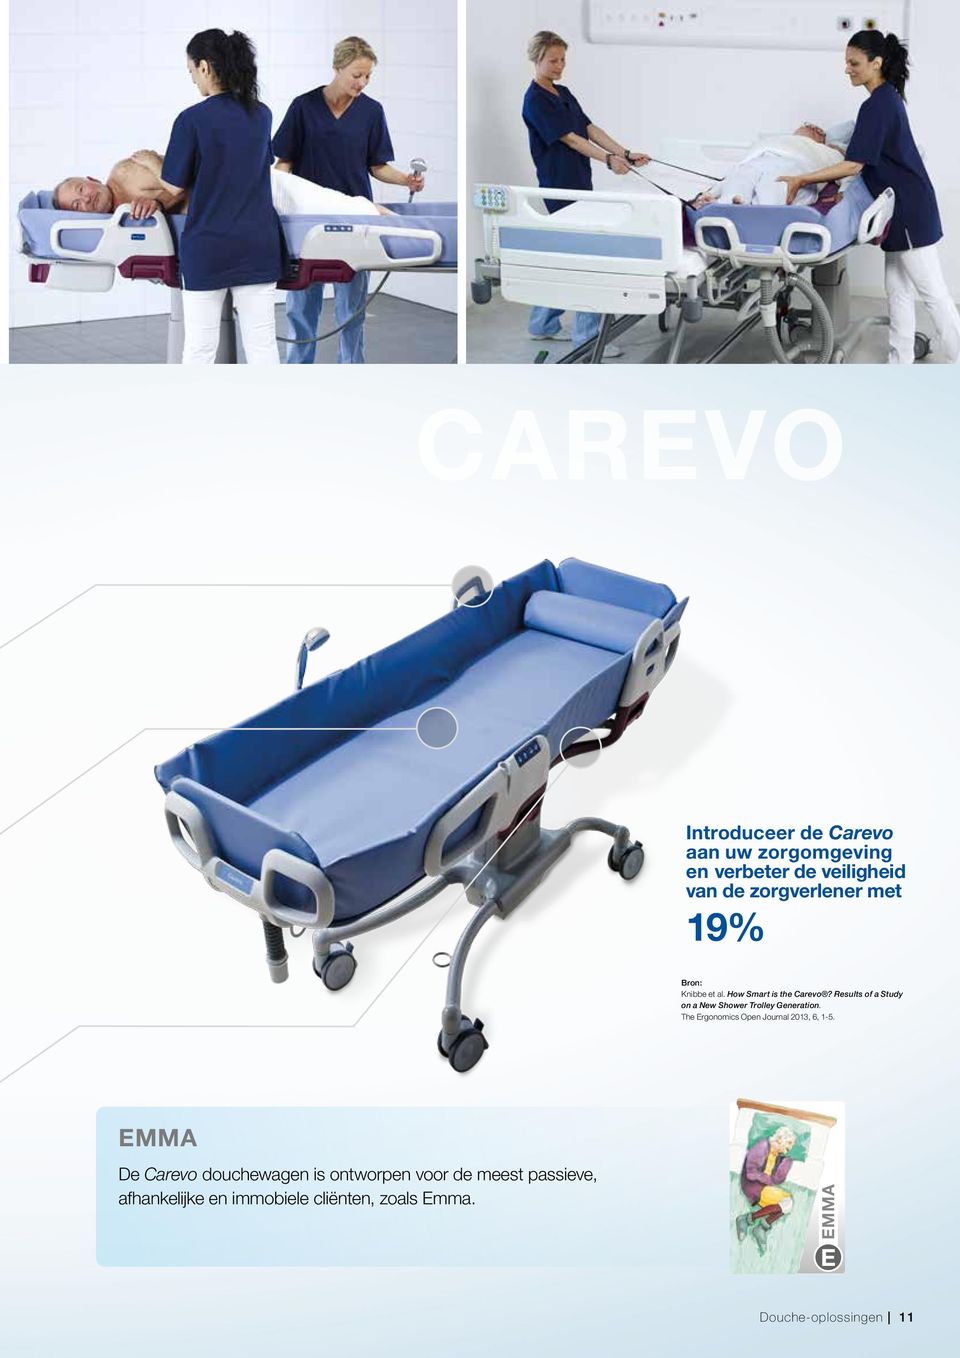 Results of a Study on a New Shower Trolley Generation. The Ergonomics Open Journal 2013, 6, 1-5.